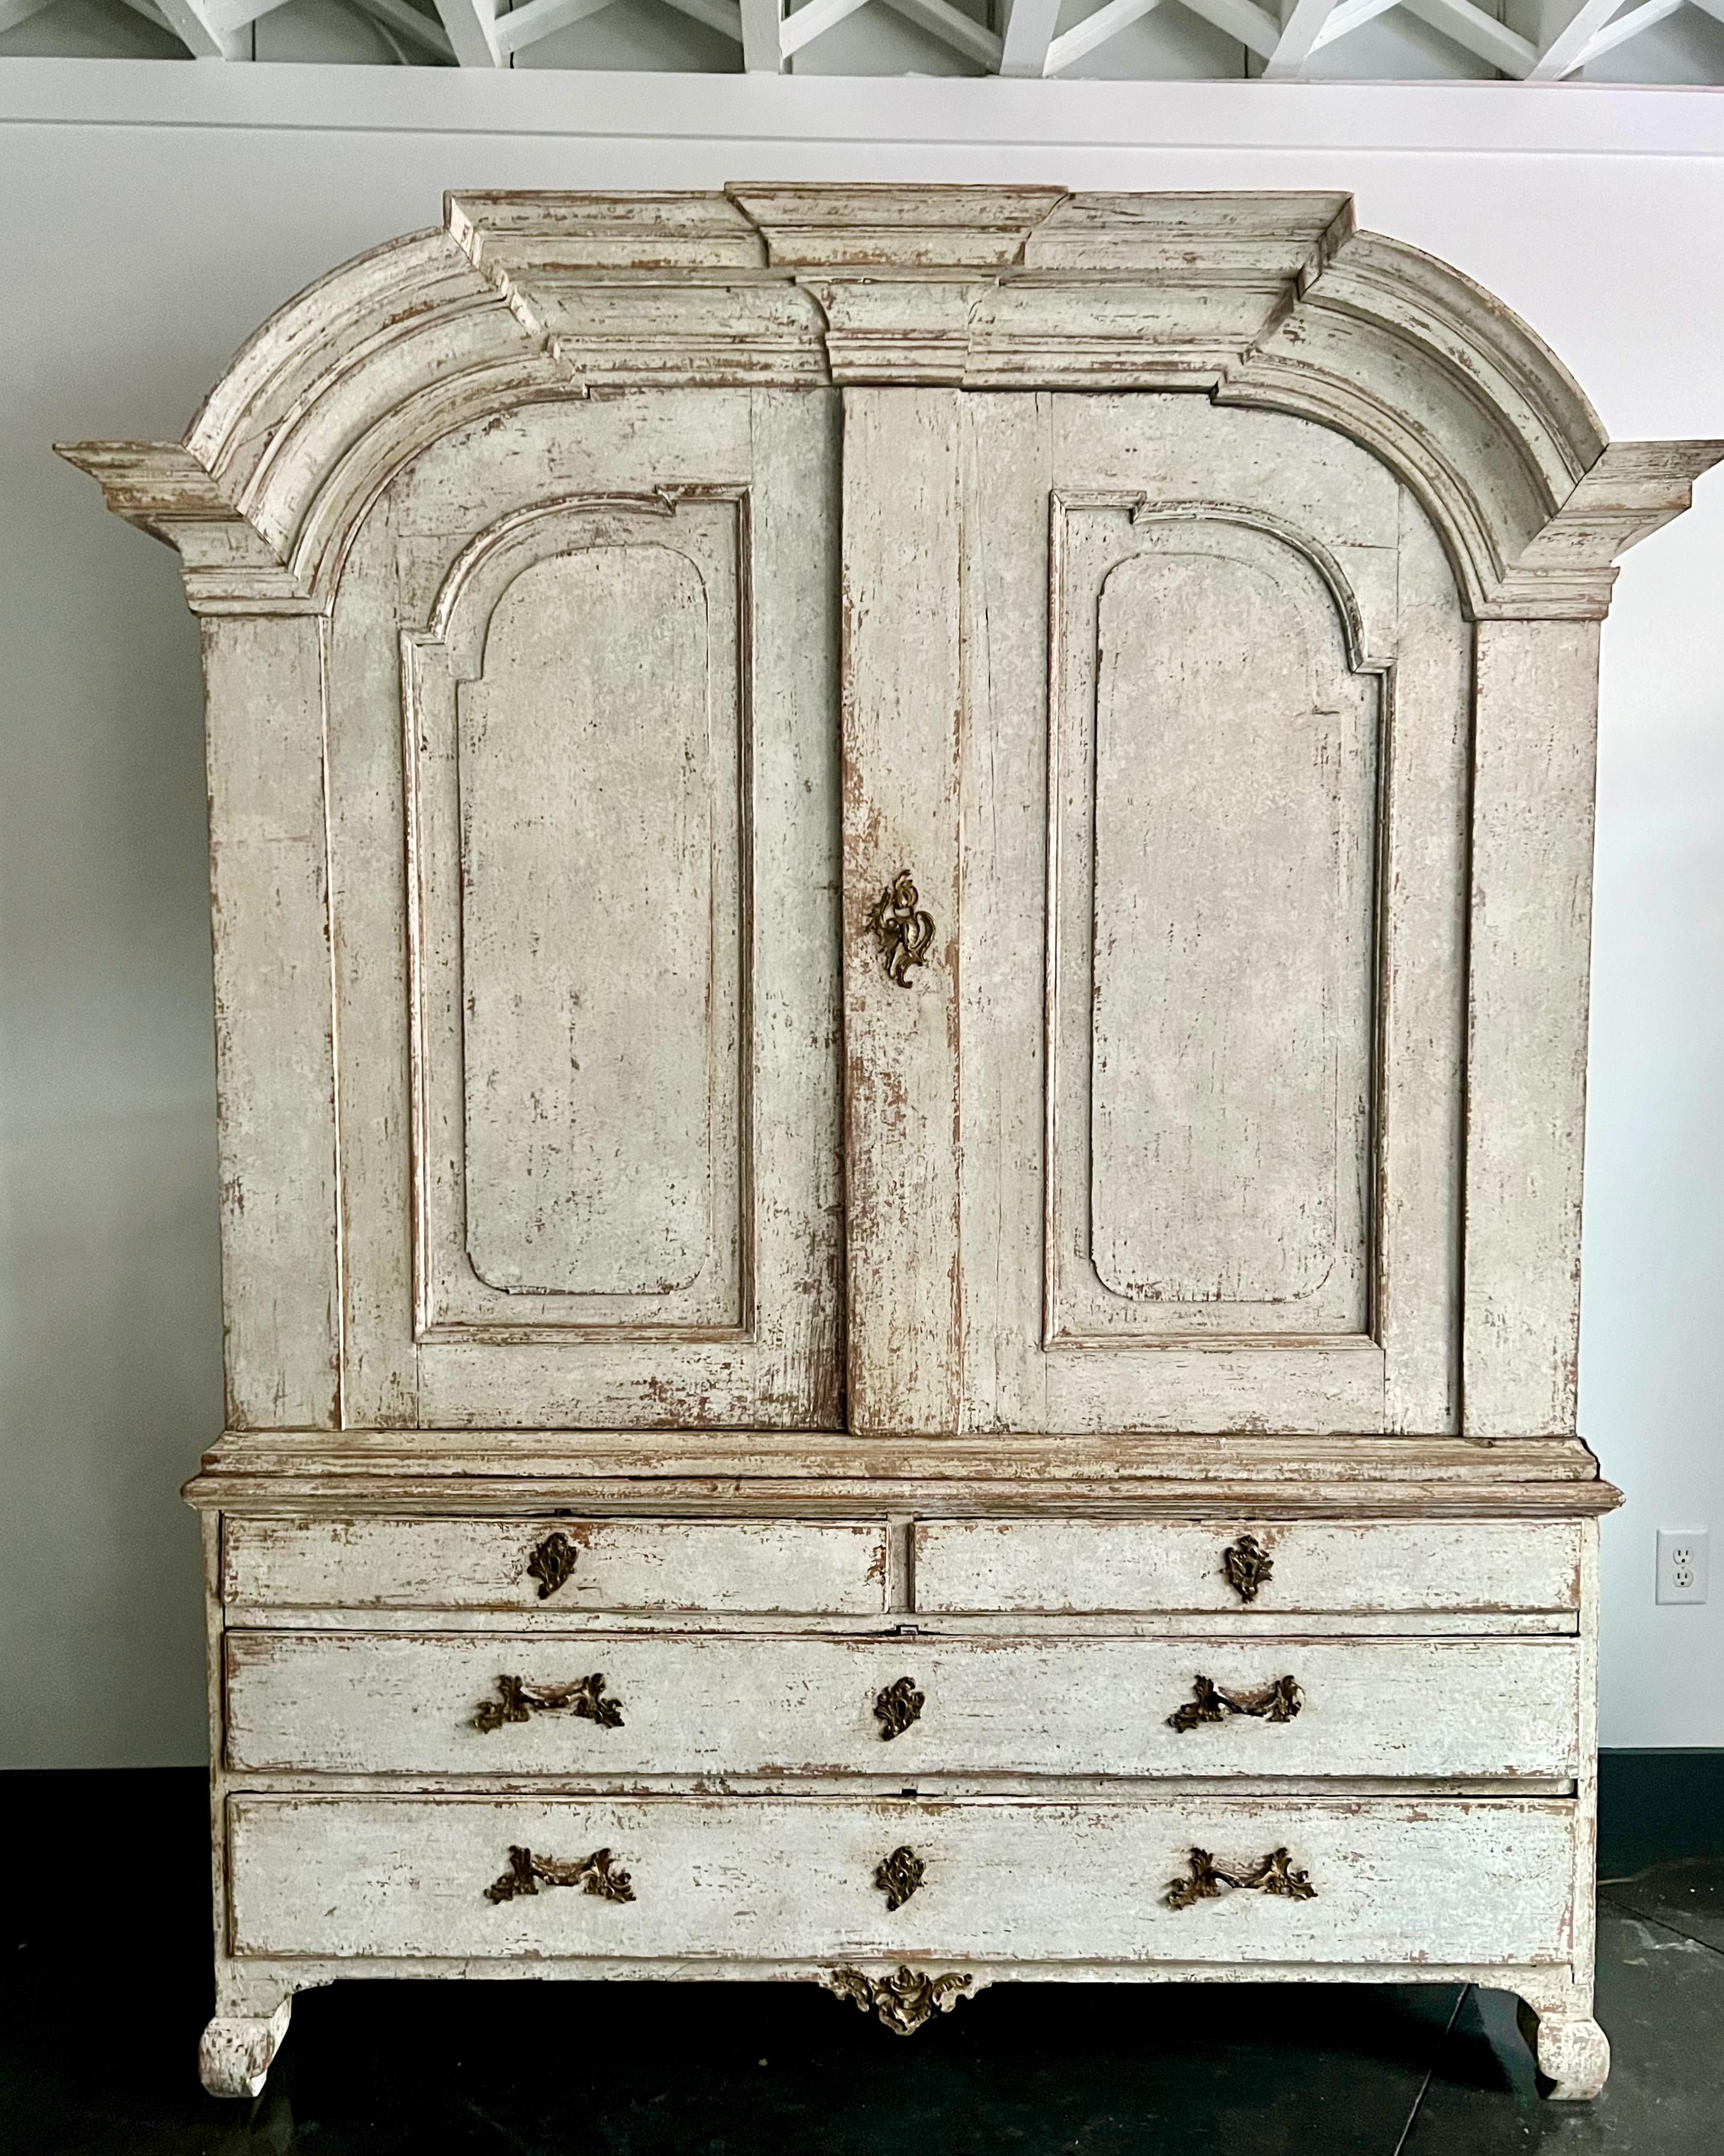 Large 18th century Swedish Rococo Period Cabinet in two pieces with wonderful arched cornice, original hardware, shaped apron and cabriole legs.Upper unit features two shelves, bank of small 3 drawers and a notched spoon shelf in blue patina. All